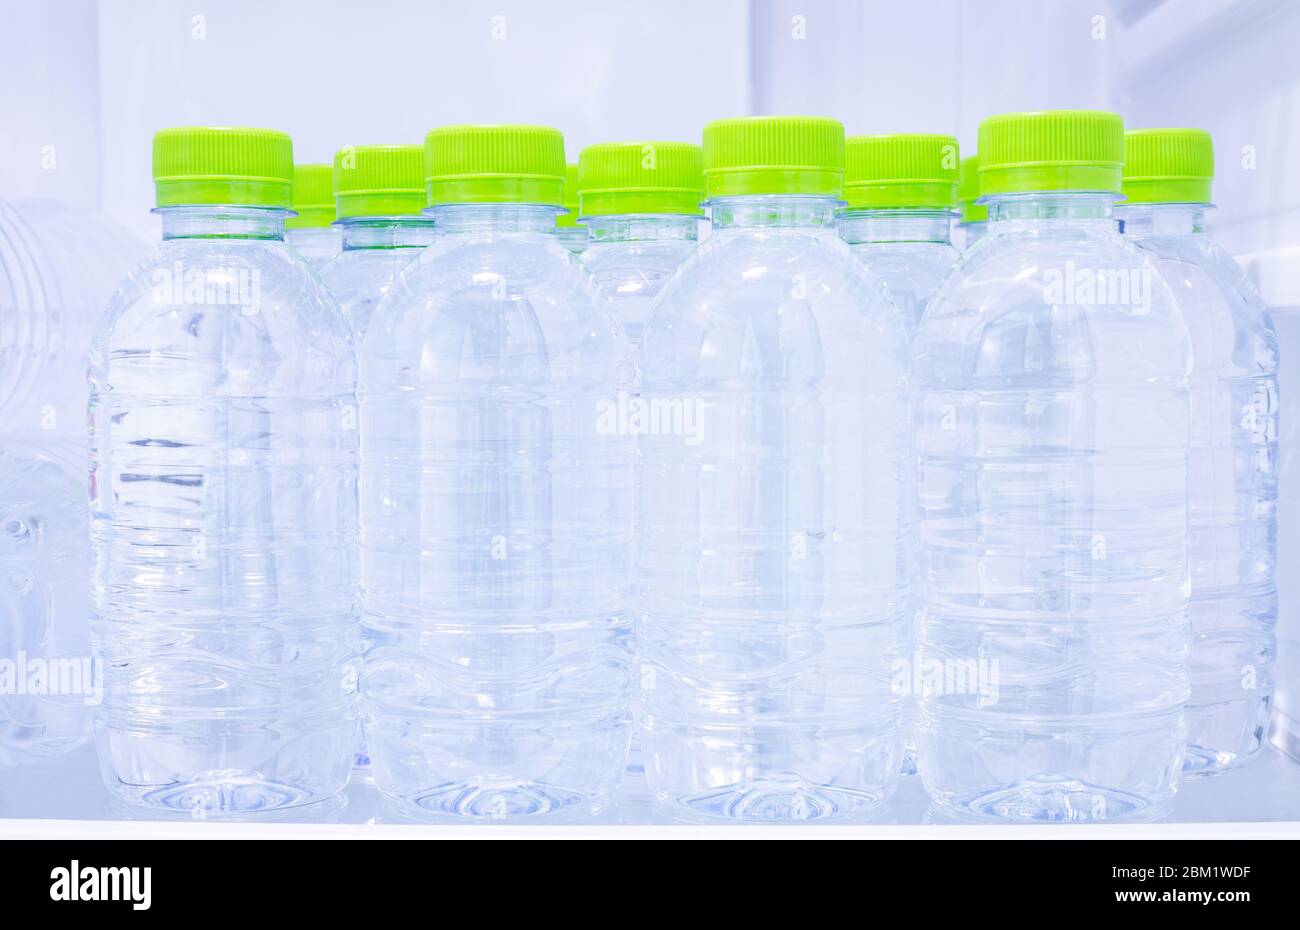 Fridge Drink With Water Bottles On A White Background Stock Photo, Picture  and Royalty Free Image. Image 35981953.